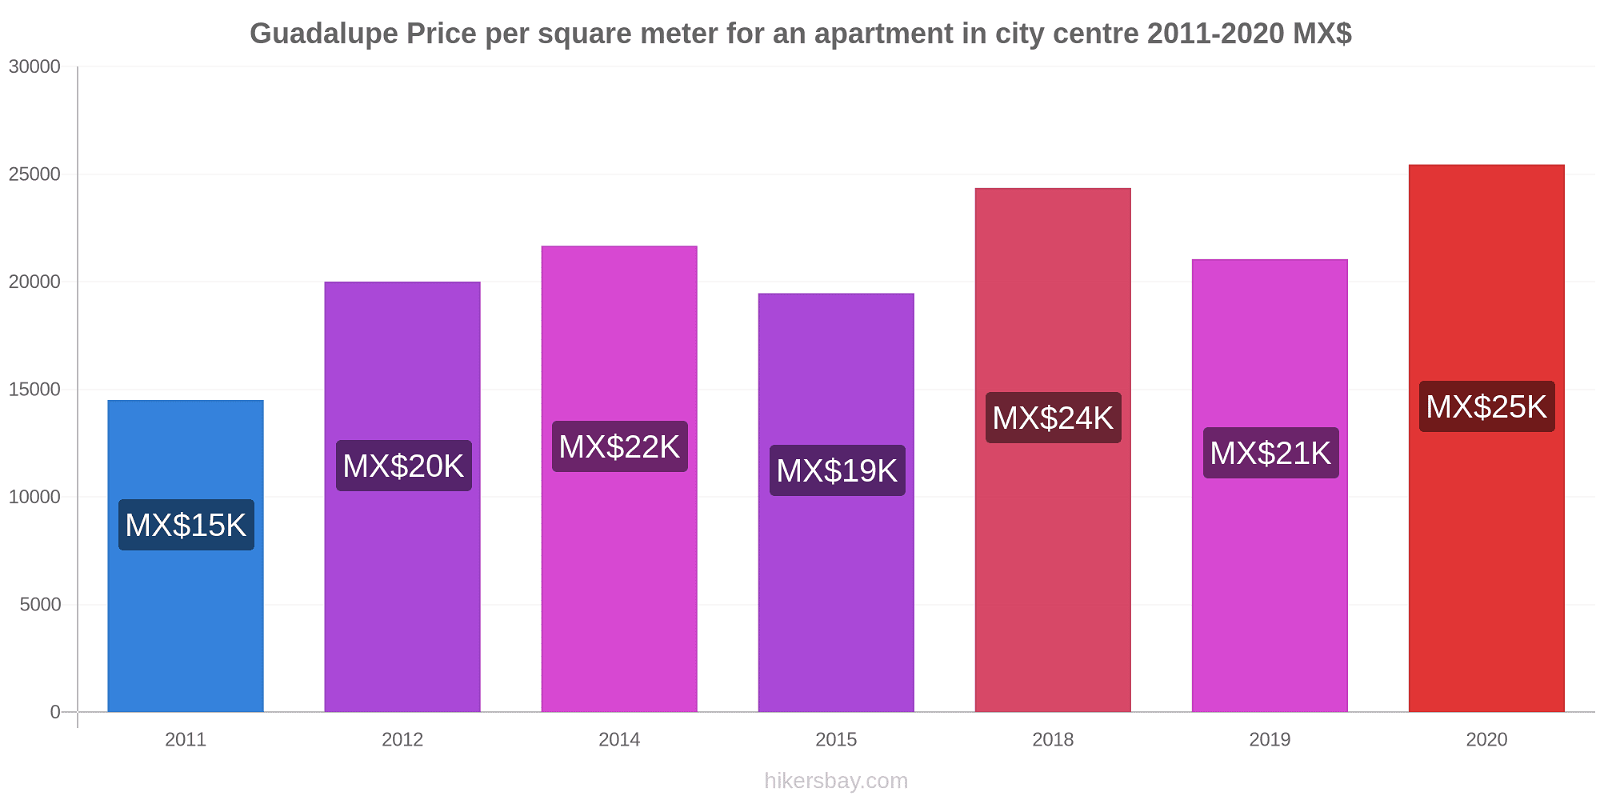 Guadalupe price changes Price per square meter for an apartment in city centre hikersbay.com